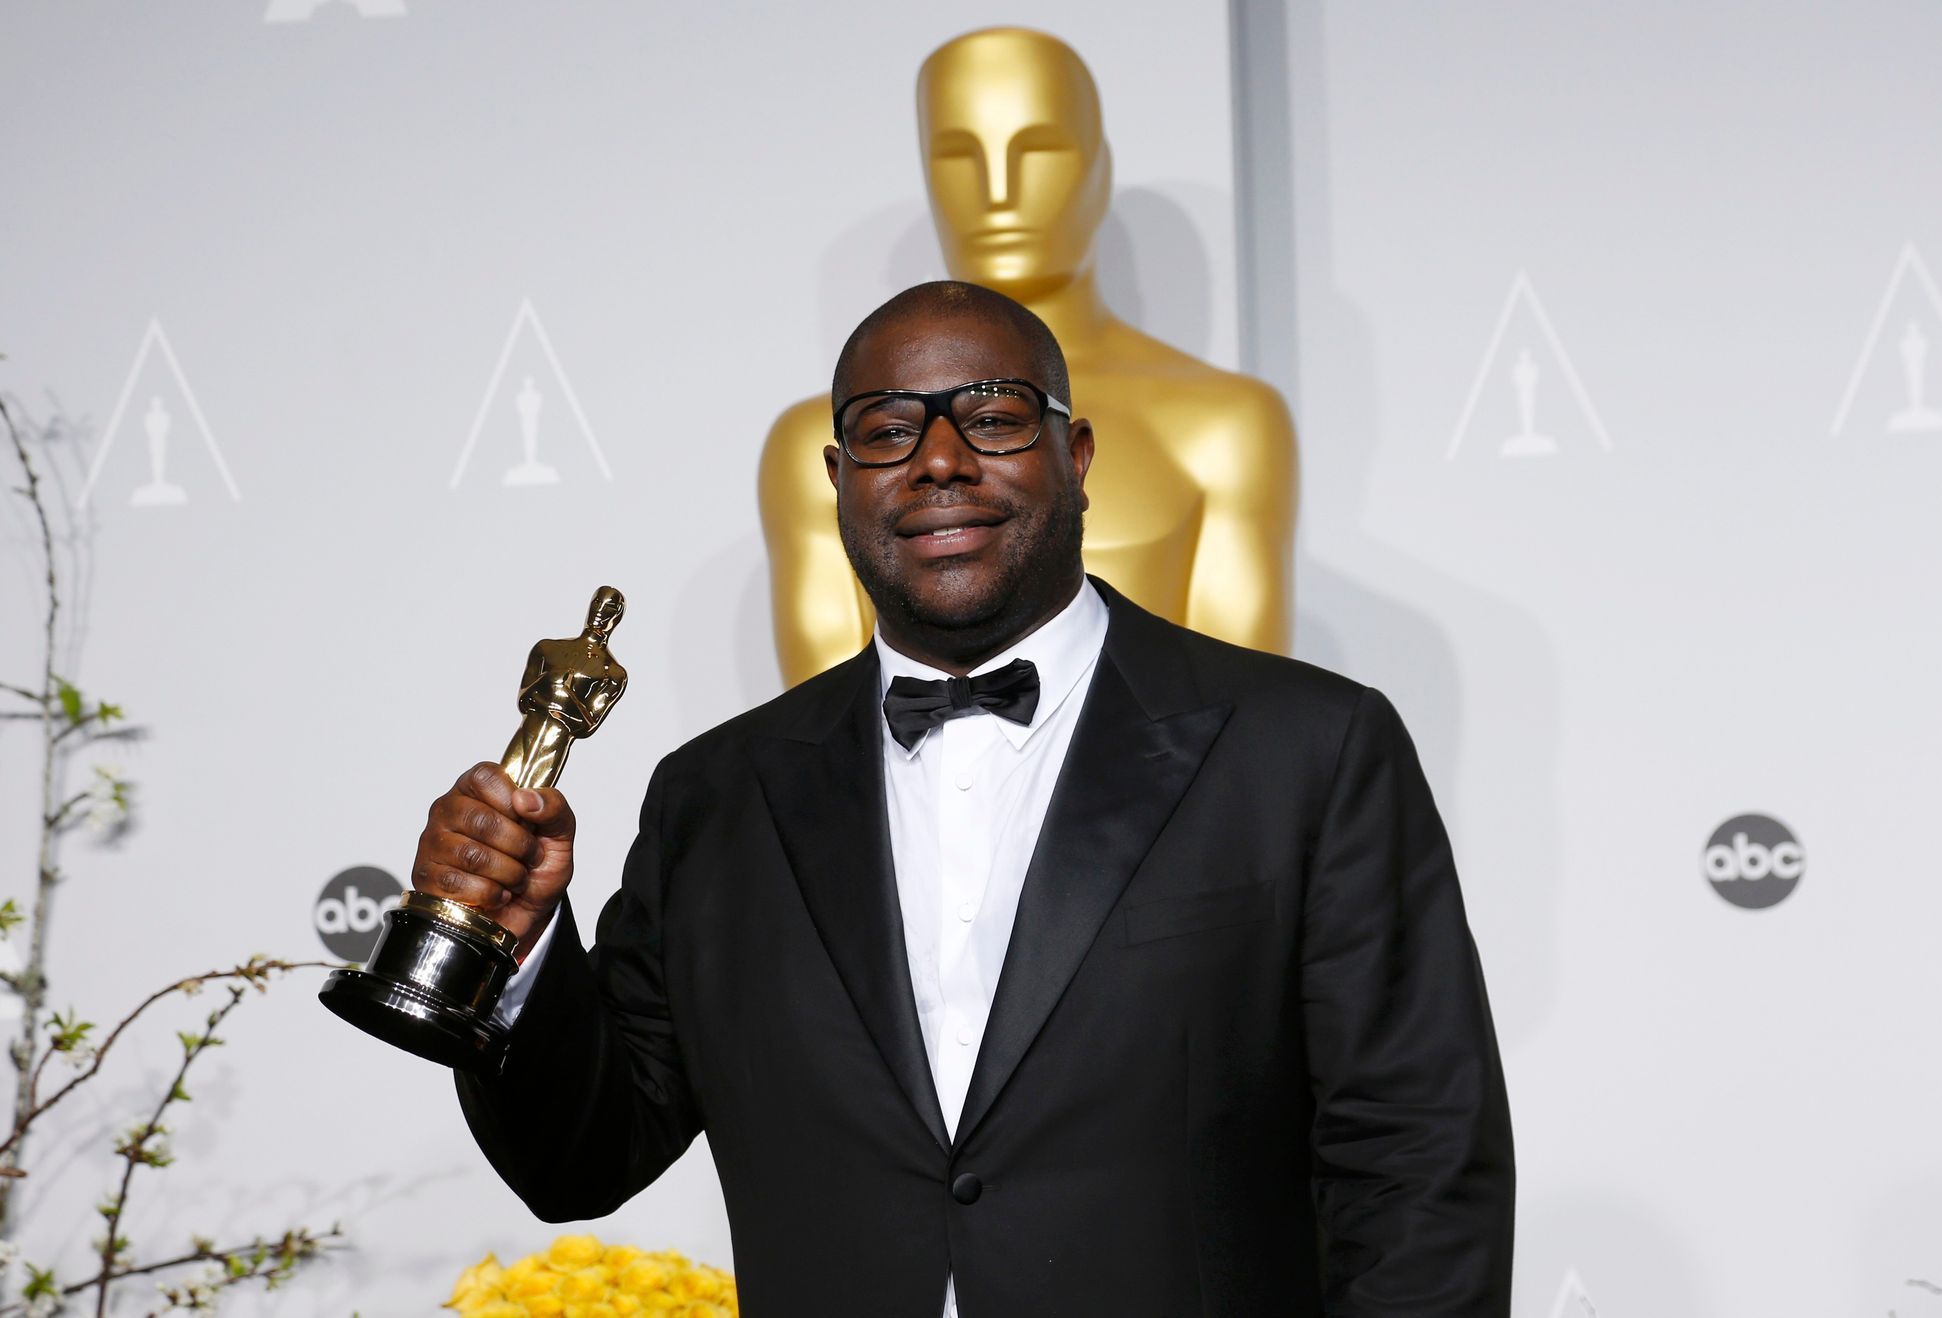 &quot;12 Years a Slave&quot; director Steve McQueen poses with his best picture award at the 86th Academy Awards in Hollywood